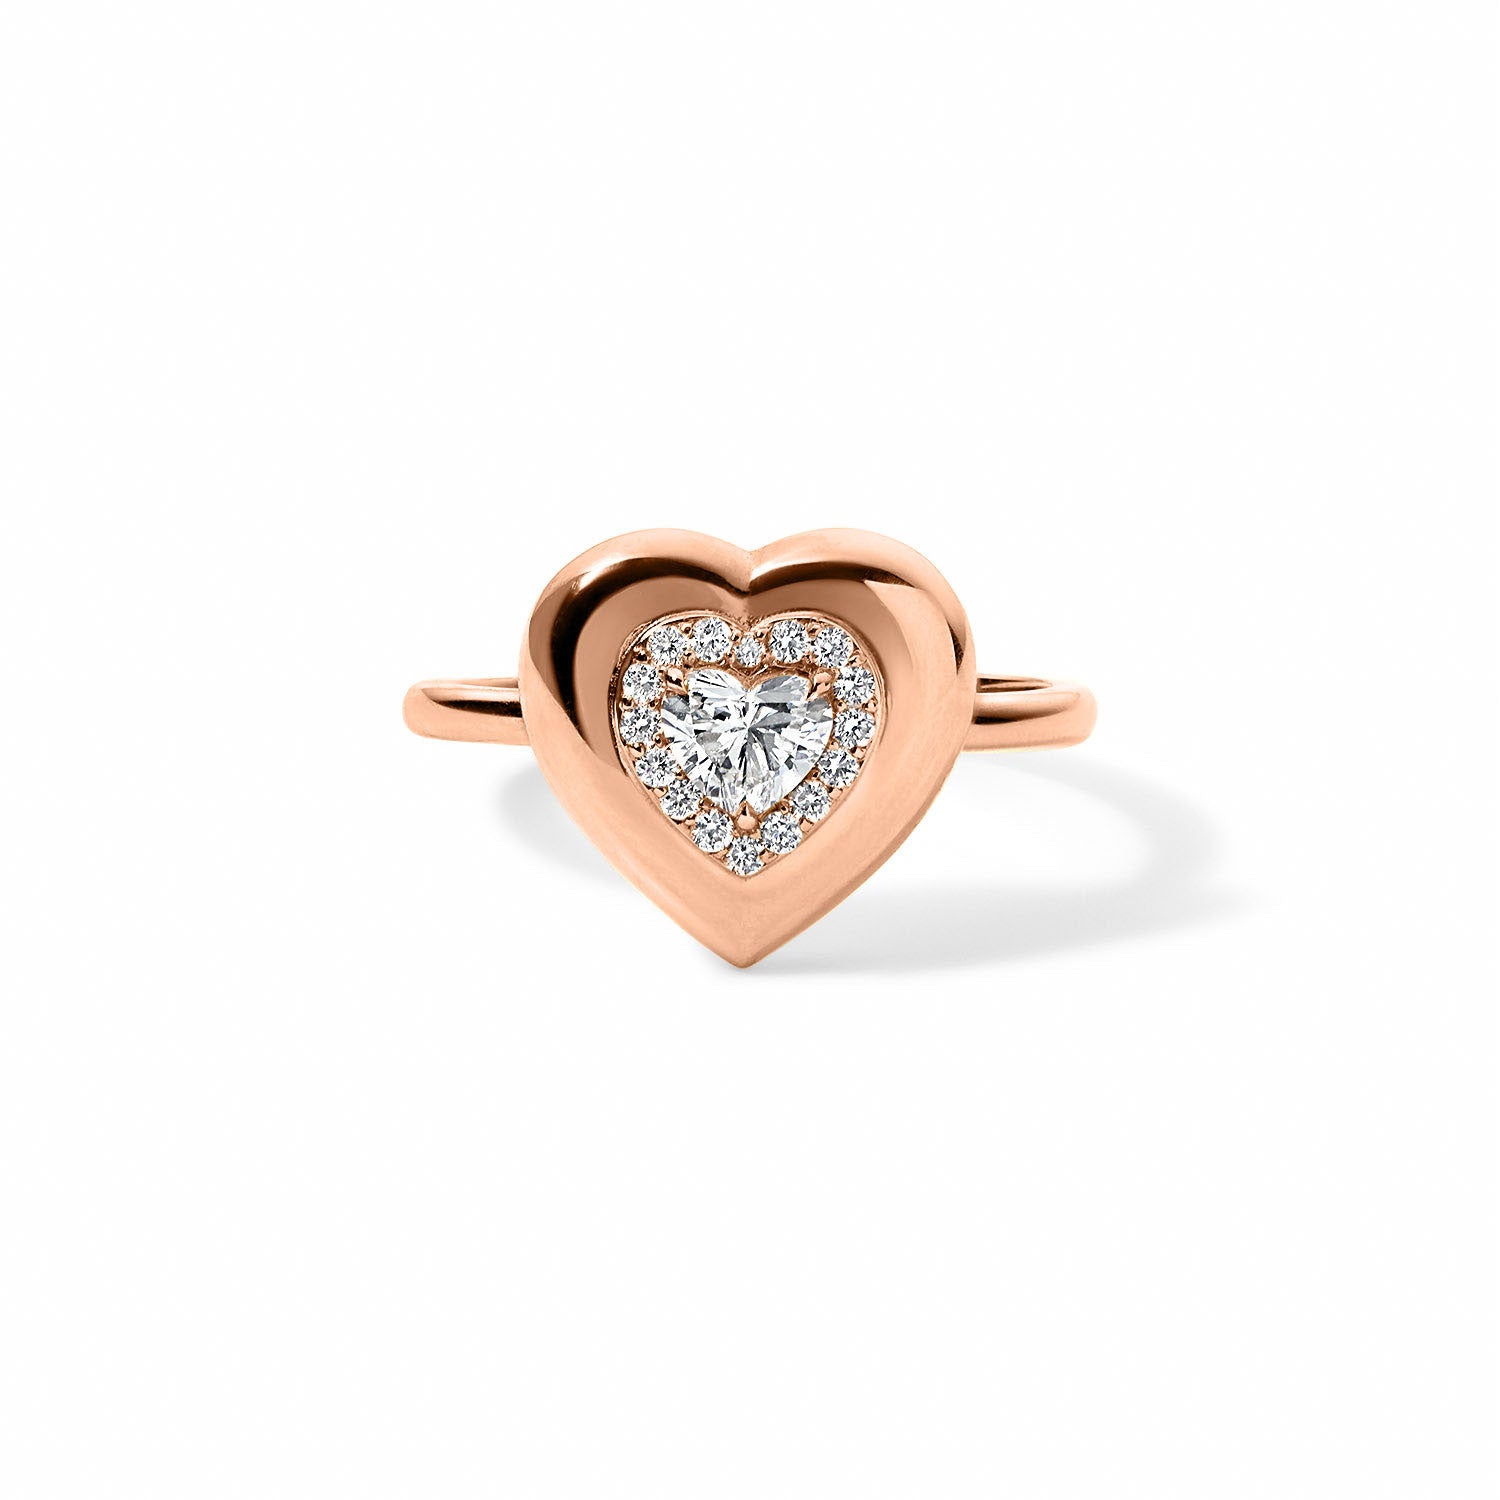 Emerald Cut Diamond Heart Ring in 14k or 18k Gold | Uverly - UVERLY